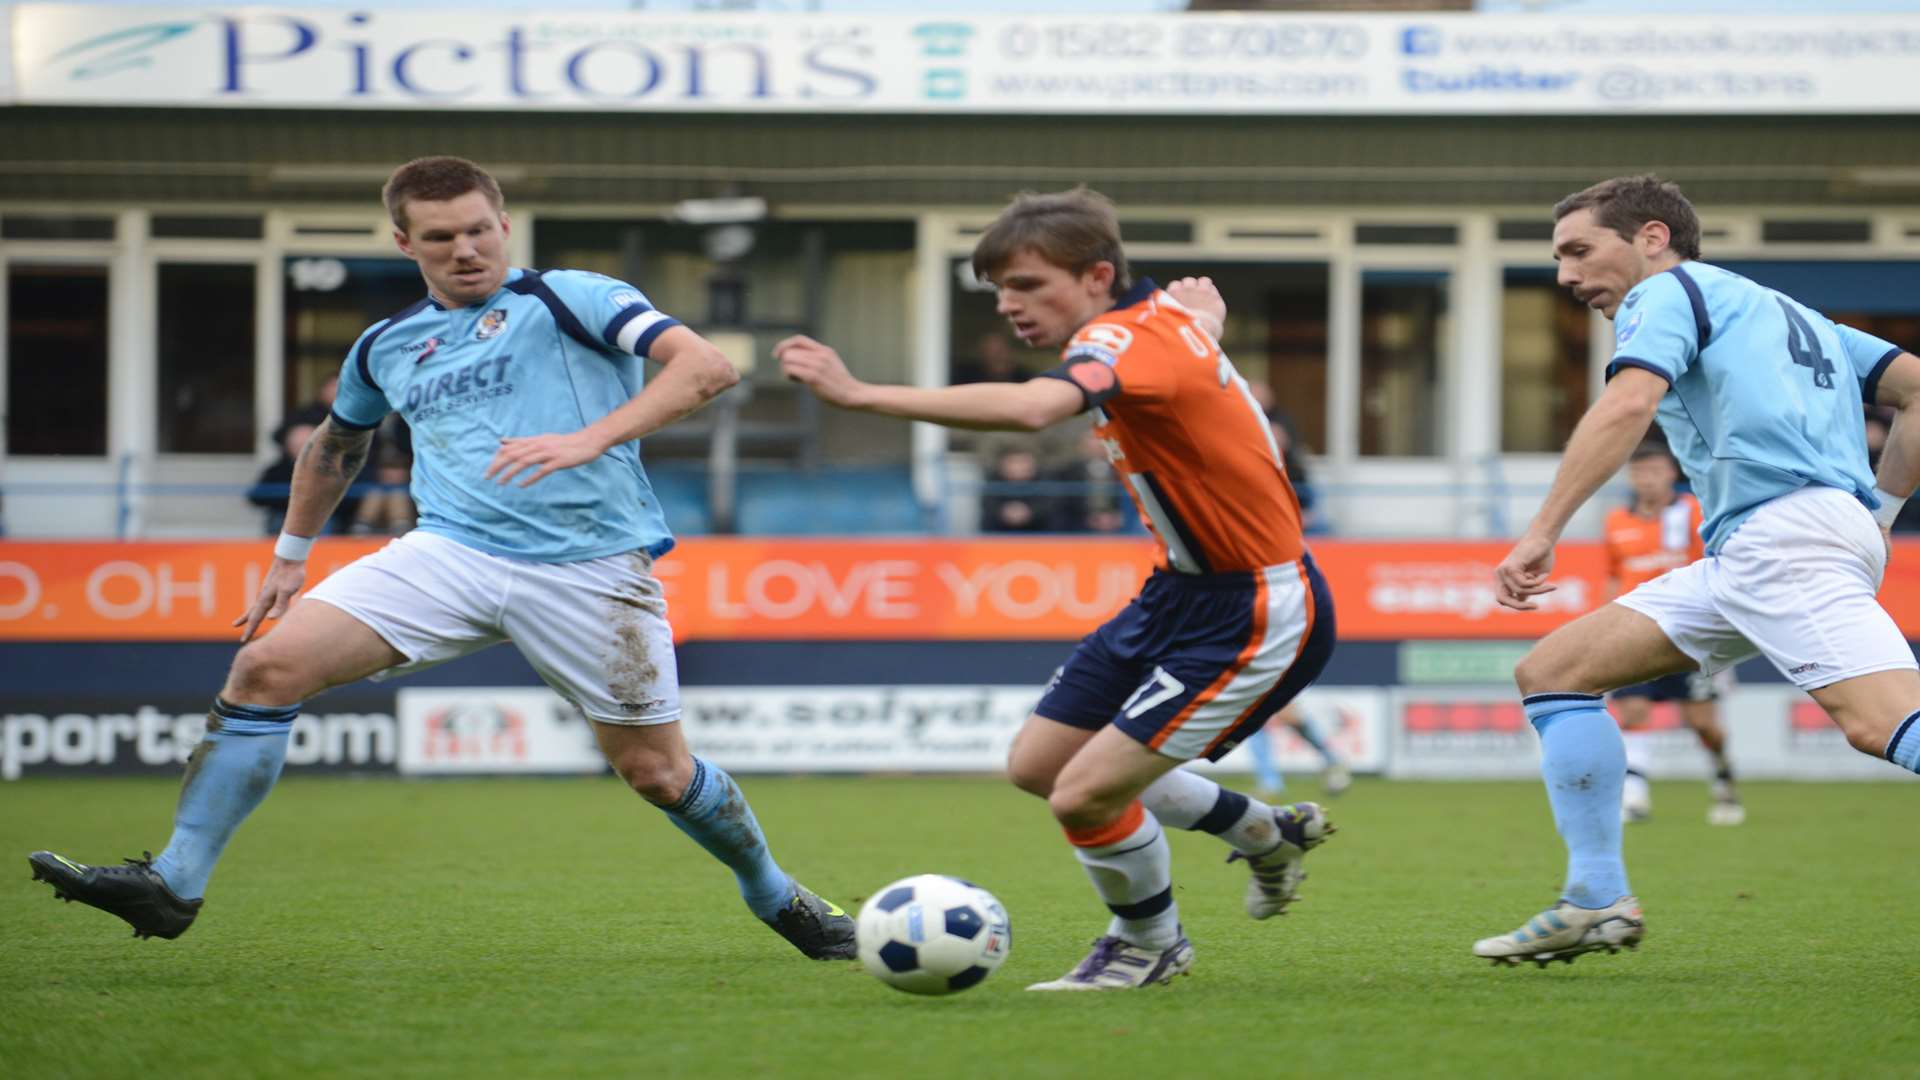 Tony Burman led Dartford to victory over Luton Town at Kenilworth Road in 2012/13